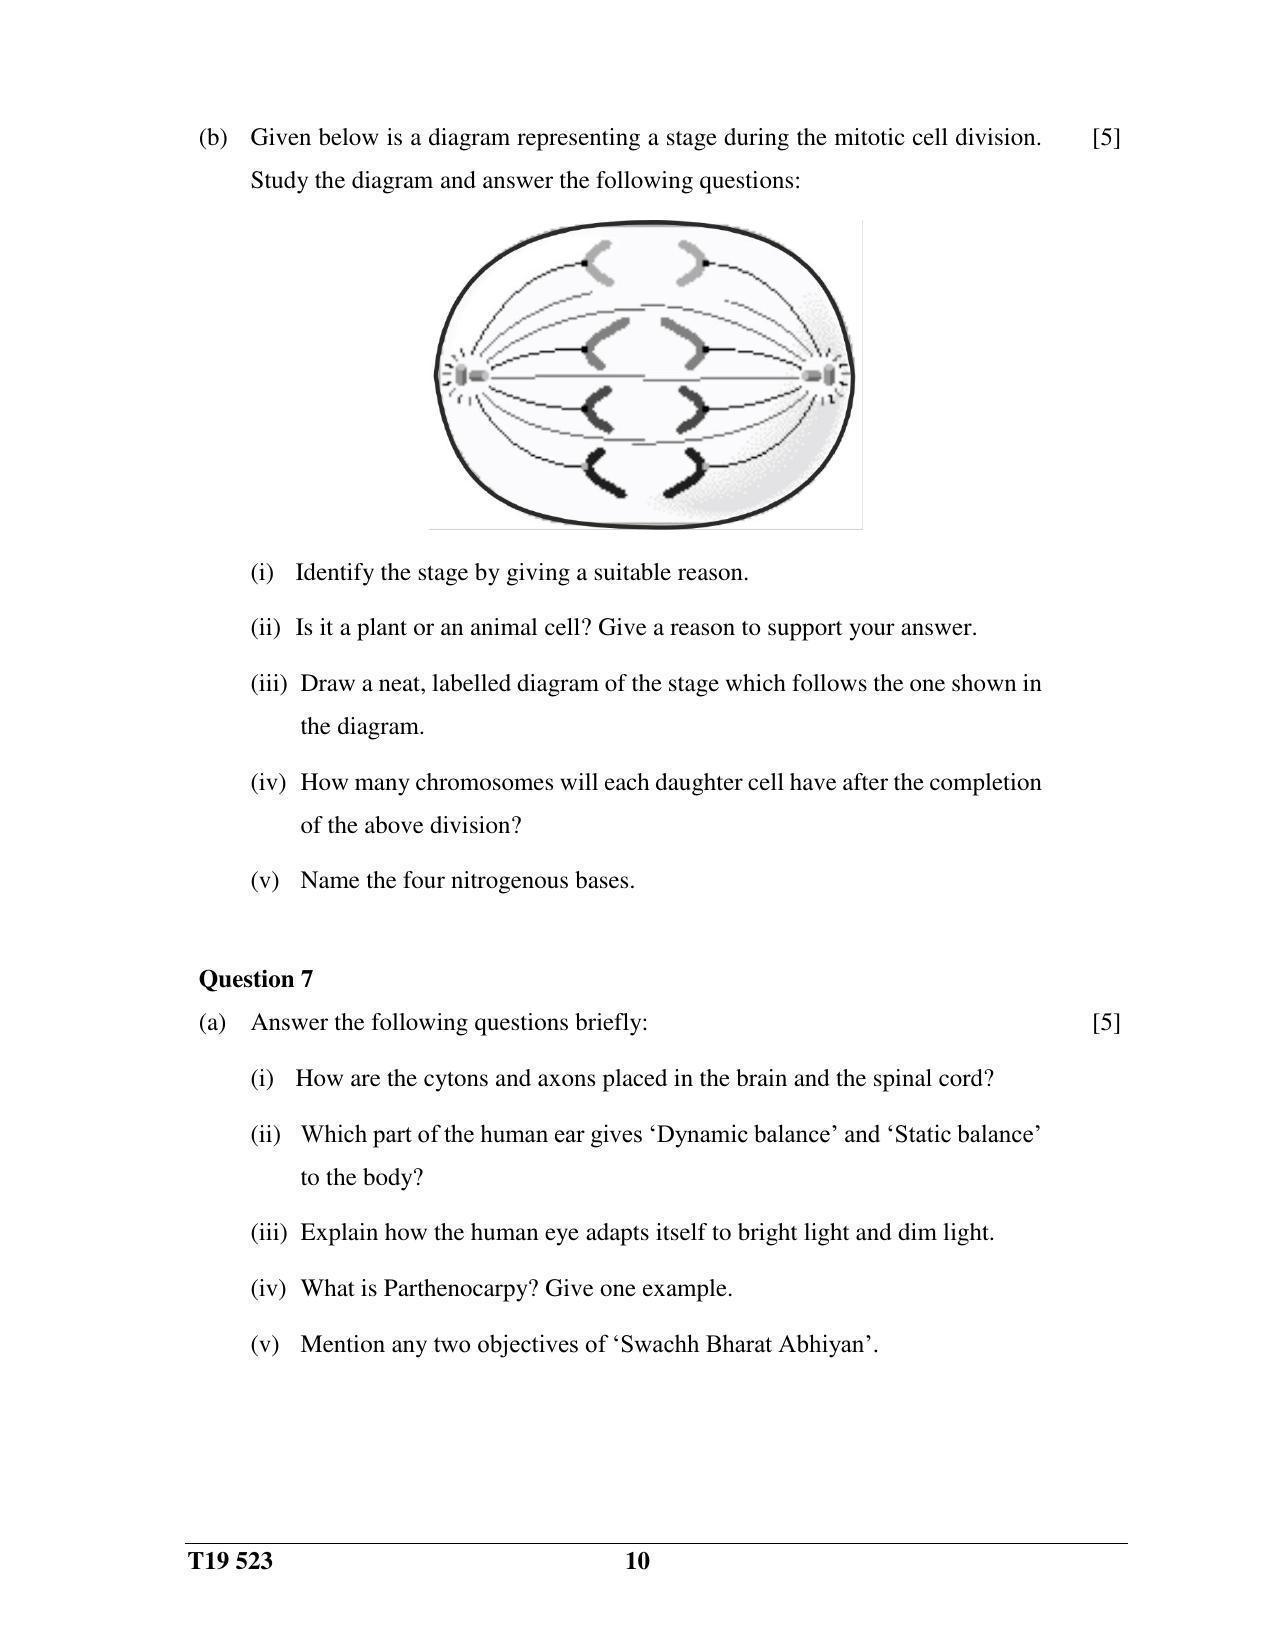 ICSE Class 10 Science Paper 3 (Biology) 2019 Question Paper - Page 10